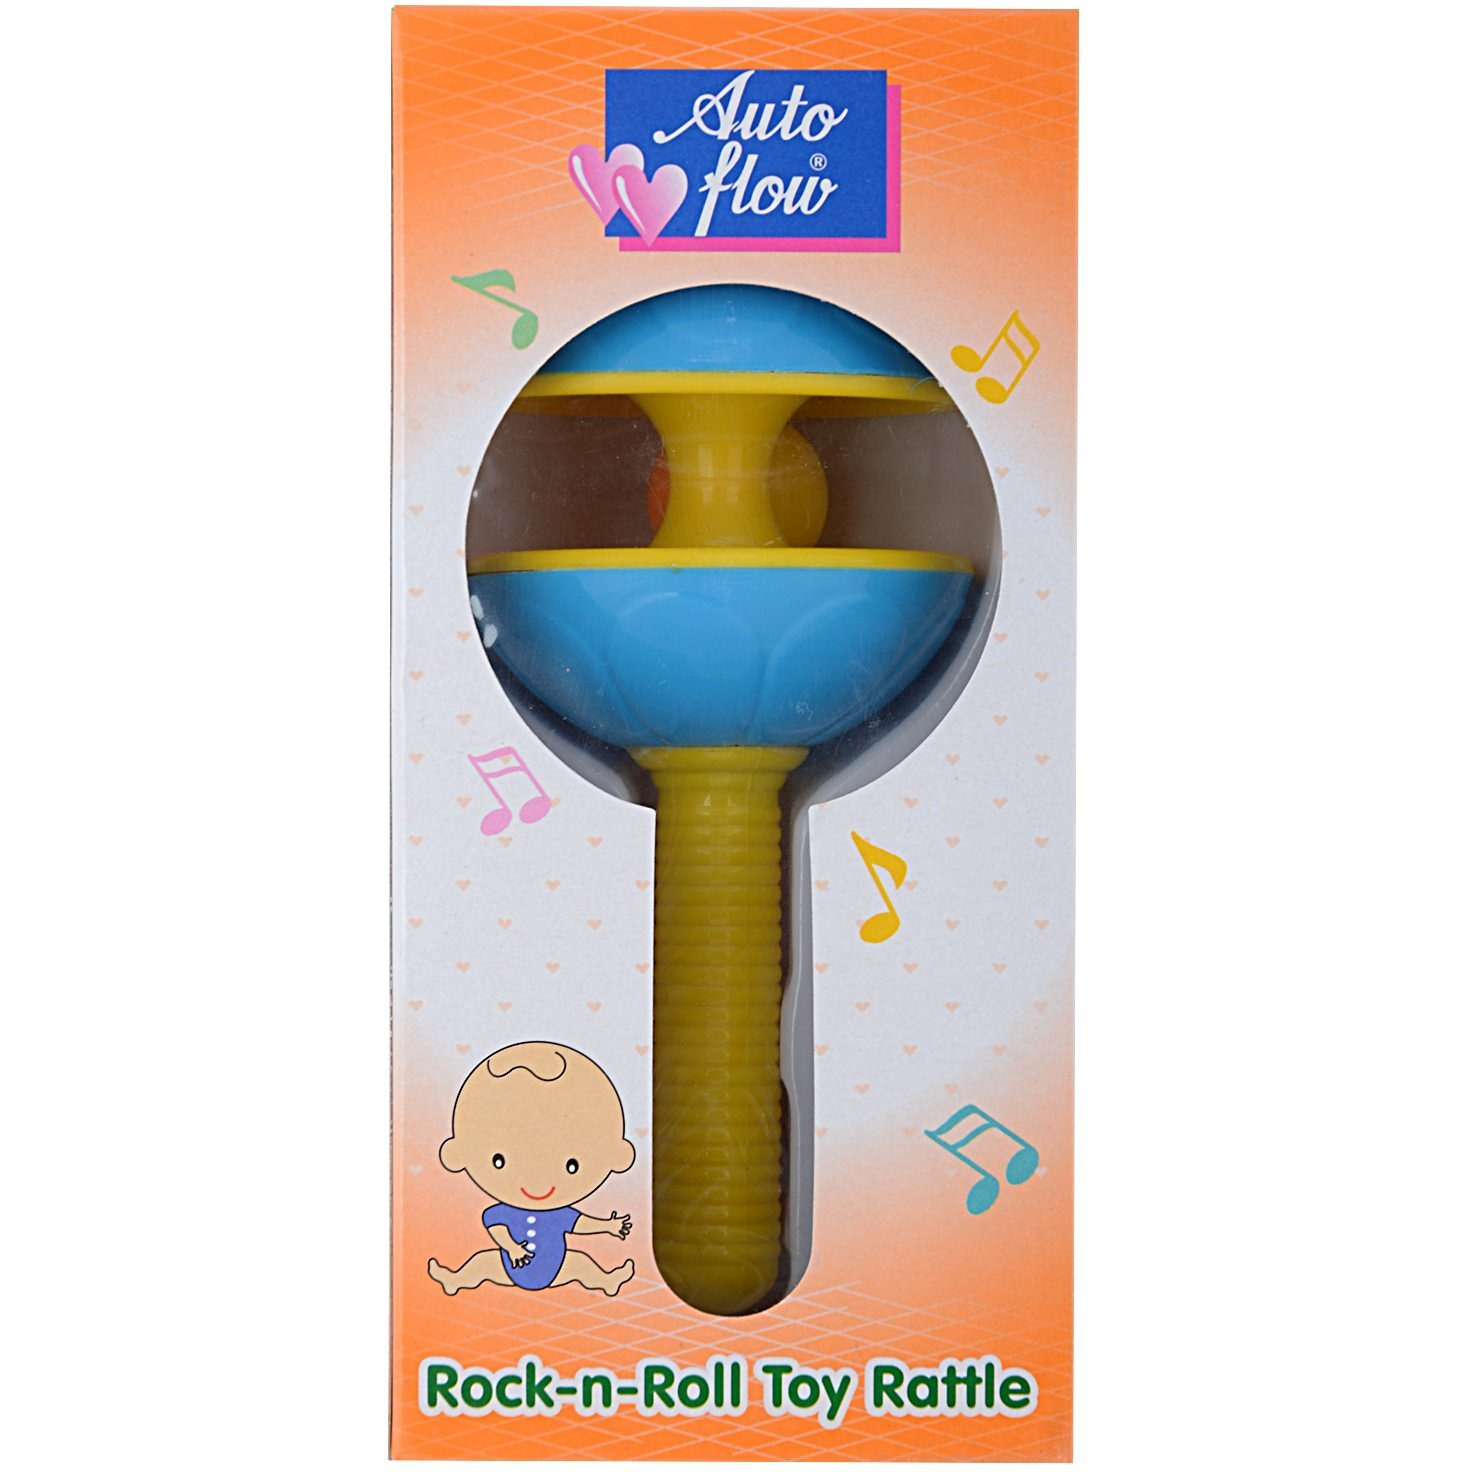 Auto Flow Rattle Toy - Rock-N-Roll - BT23 Yellow